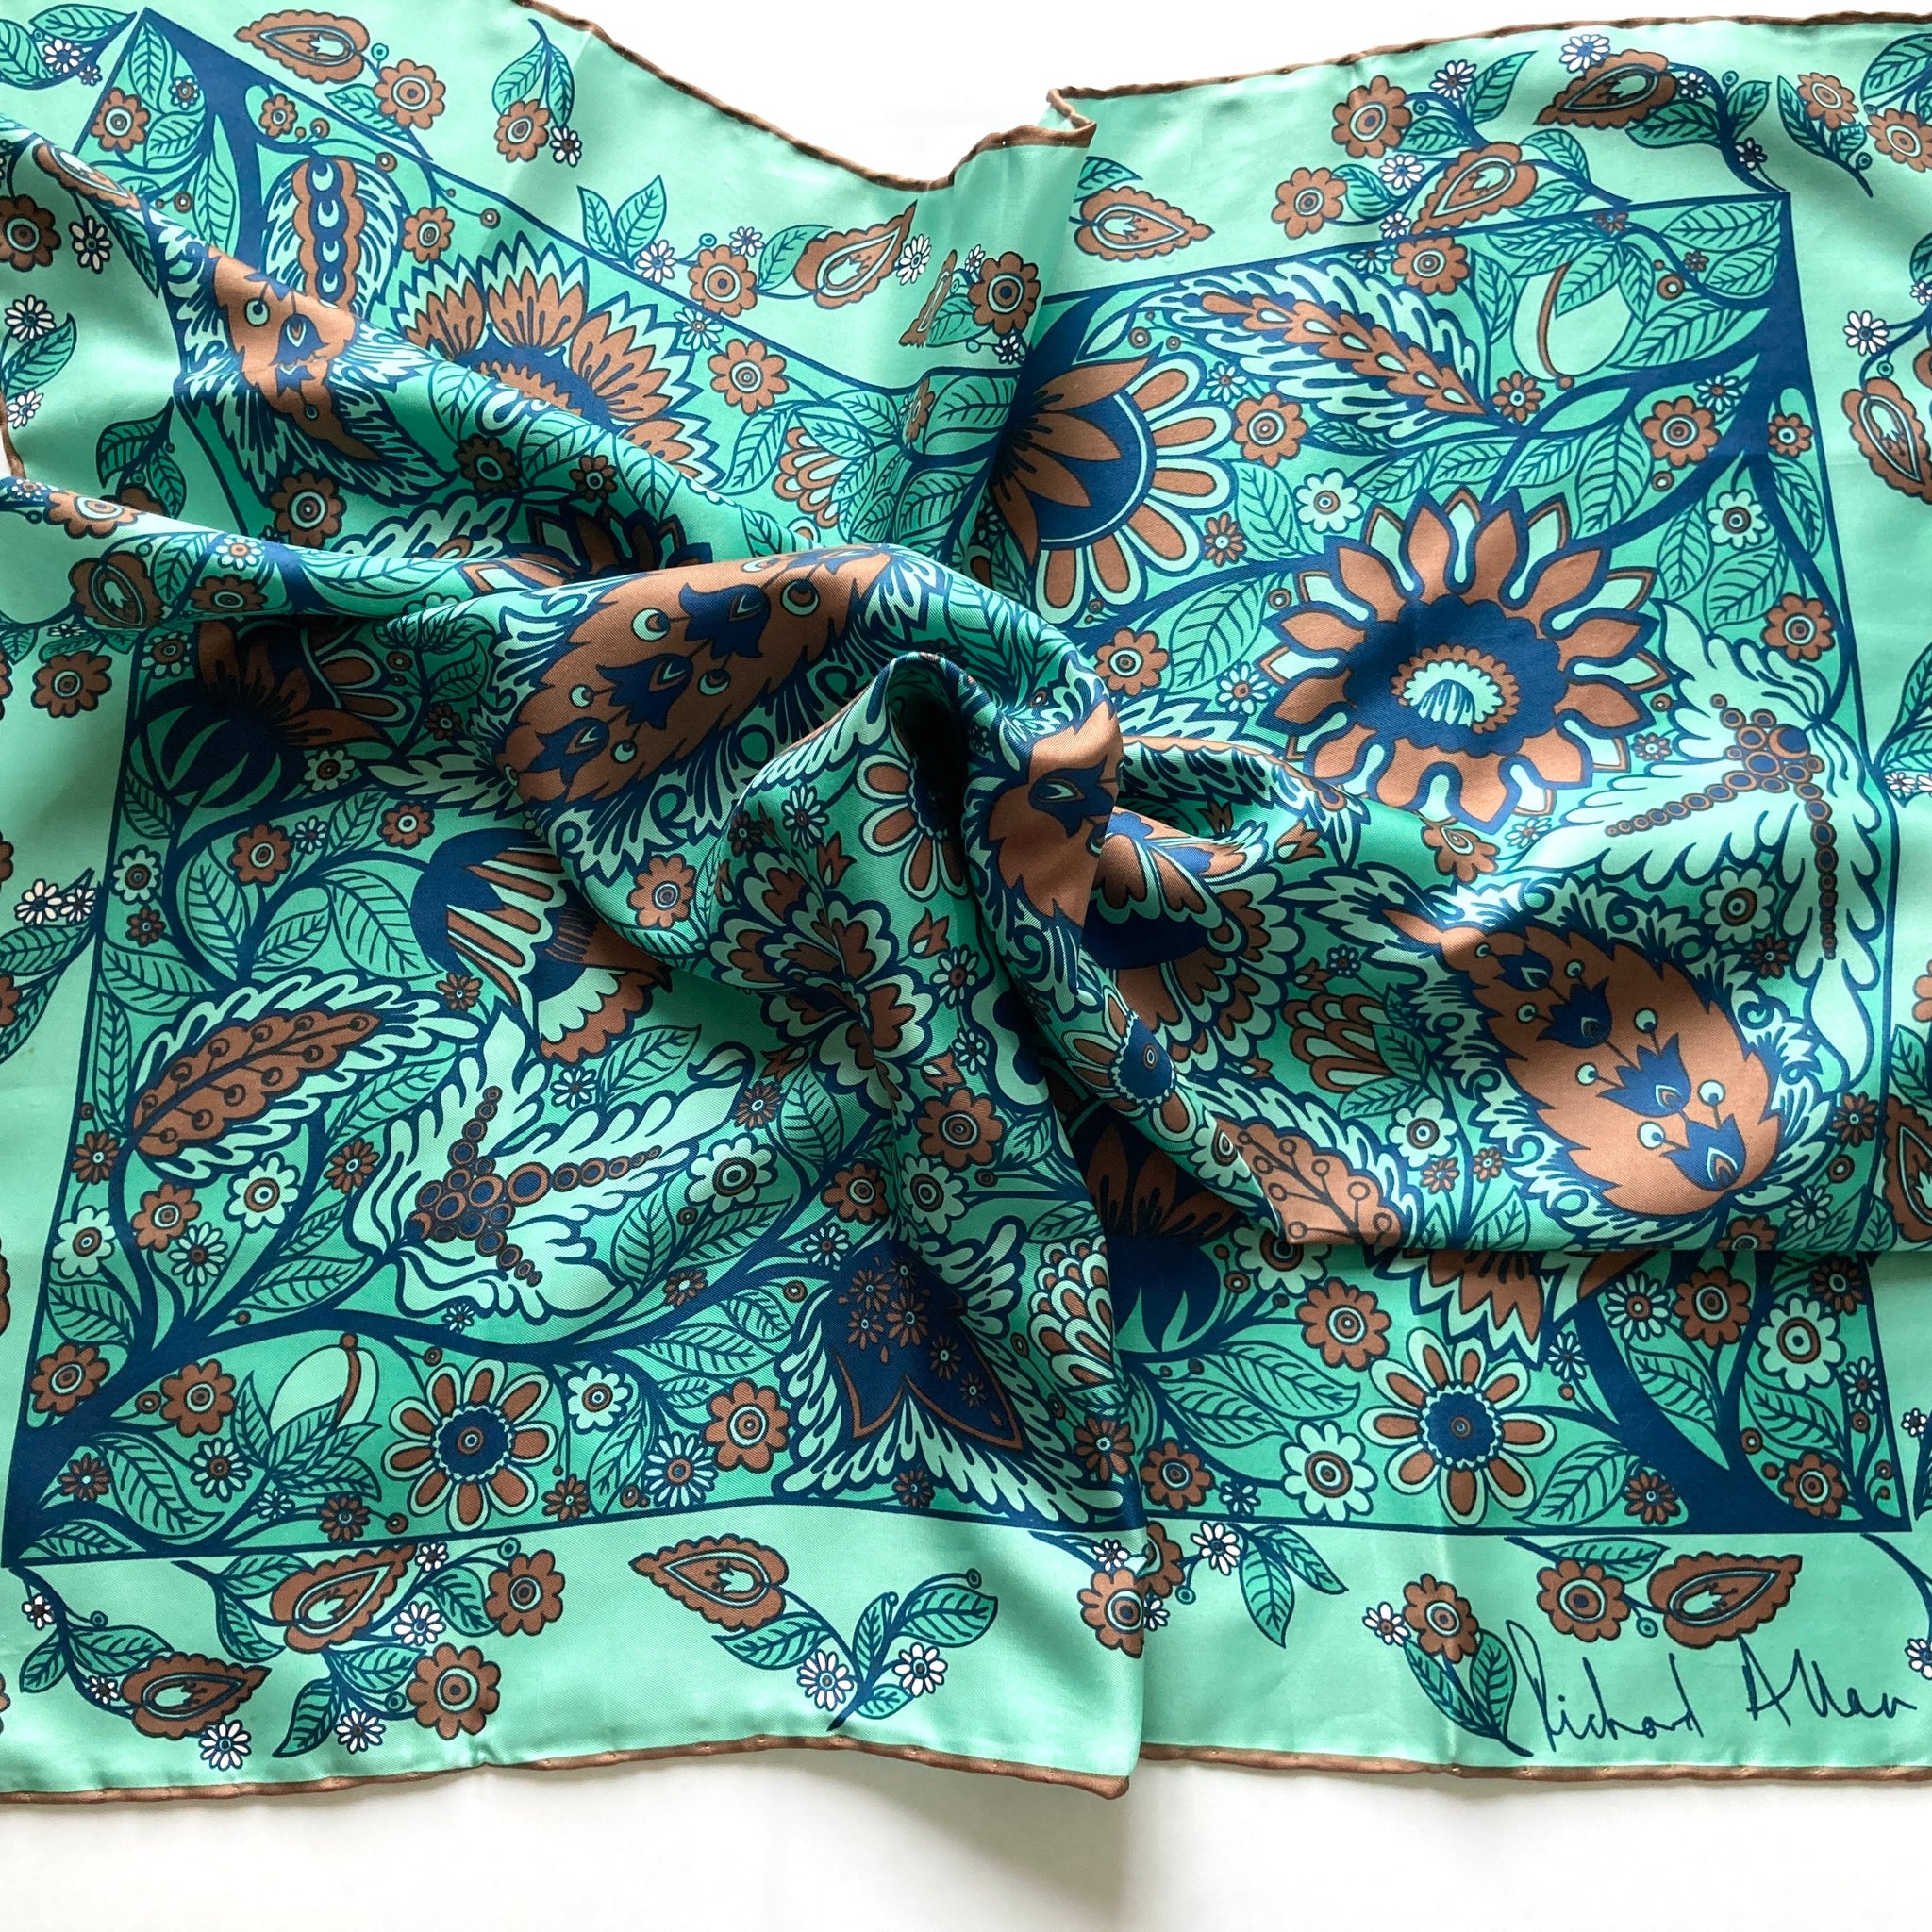 Vintage Collectable Silk Scarf By Richard Allan In Turquoise/Sea Green ...